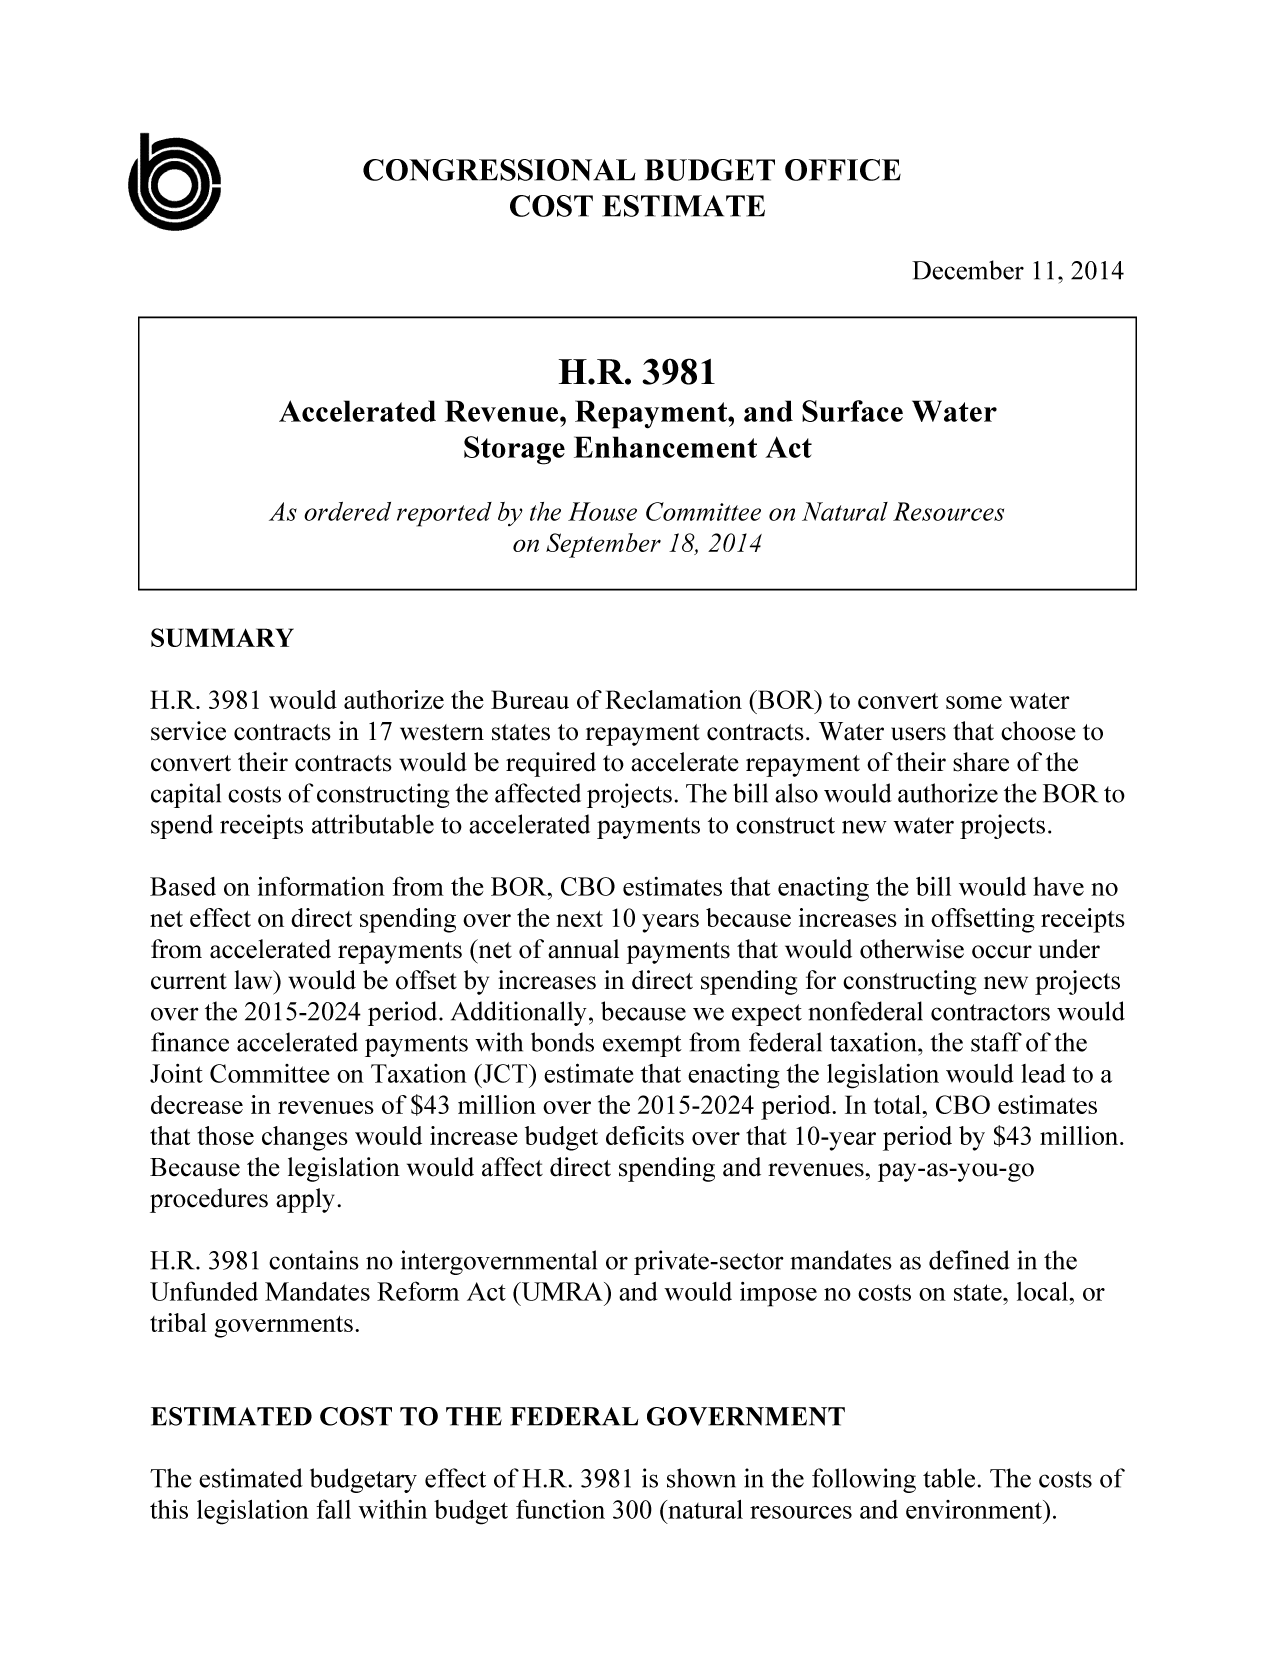 handle is hein.congrec/cbo2057 and id is 1 raw text is: kCONGRESSIONAL BUDGET OFFICE
U                            COST ESTIMATE
December 11,2014
H.R. 3981
Accelerated Revenue, Repayment, and Surface Water
Storage Enhancement Act
As ordered reported by the House Committee on Natural Resources
on September 18, 2014
SUMMARY
H.R. 3981 would authorize the Bureau of Reclamation (BOR) to convert some water
service contracts in 17 western states to repayment contracts. Water users that choose to
convert their contracts would be required to accelerate repayment of their share of the
capital costs of constructing the affected projects. The bill also would authorize the BOR to
spend receipts attributable to accelerated payments to construct new water projects.
Based on information from the BOR, CBO estimates that enacting the bill would have no
net effect on direct spending over the next 10 years because increases in offsetting receipts
from accelerated repayments (net of annual payments that would otherwise occur under
current law) would be offset by increases in direct spending for constructing new projects
over the 2015-2024 period. Additionally, because we expect nonfederal contractors would
finance accelerated payments with bonds exempt from federal taxation, the staff of the
Joint Committee on Taxation (JCT) estimate that enacting the legislation would lead to a
decrease in revenues of $43 million over the 2015-2024 period. In total, CBO estimates
that those changes would increase budget deficits over that 10-year period by $43 million.
Because the legislation would affect direct spending and revenues, pay-as-you-go
procedures apply.
H.R. 3981 contains no intergovernmental or private-sector mandates as defined in the
Unfunded Mandates Reform Act (UMRA) and would impose no costs on state, local, or
tribal governments.
ESTIMATED COST TO THE FEDERAL GOVERNMENT
The estimated budgetary effect of H.R. 3981 is shown in the following table. The costs of
this legislation fall within budget function 300 (natural resources and environment).


